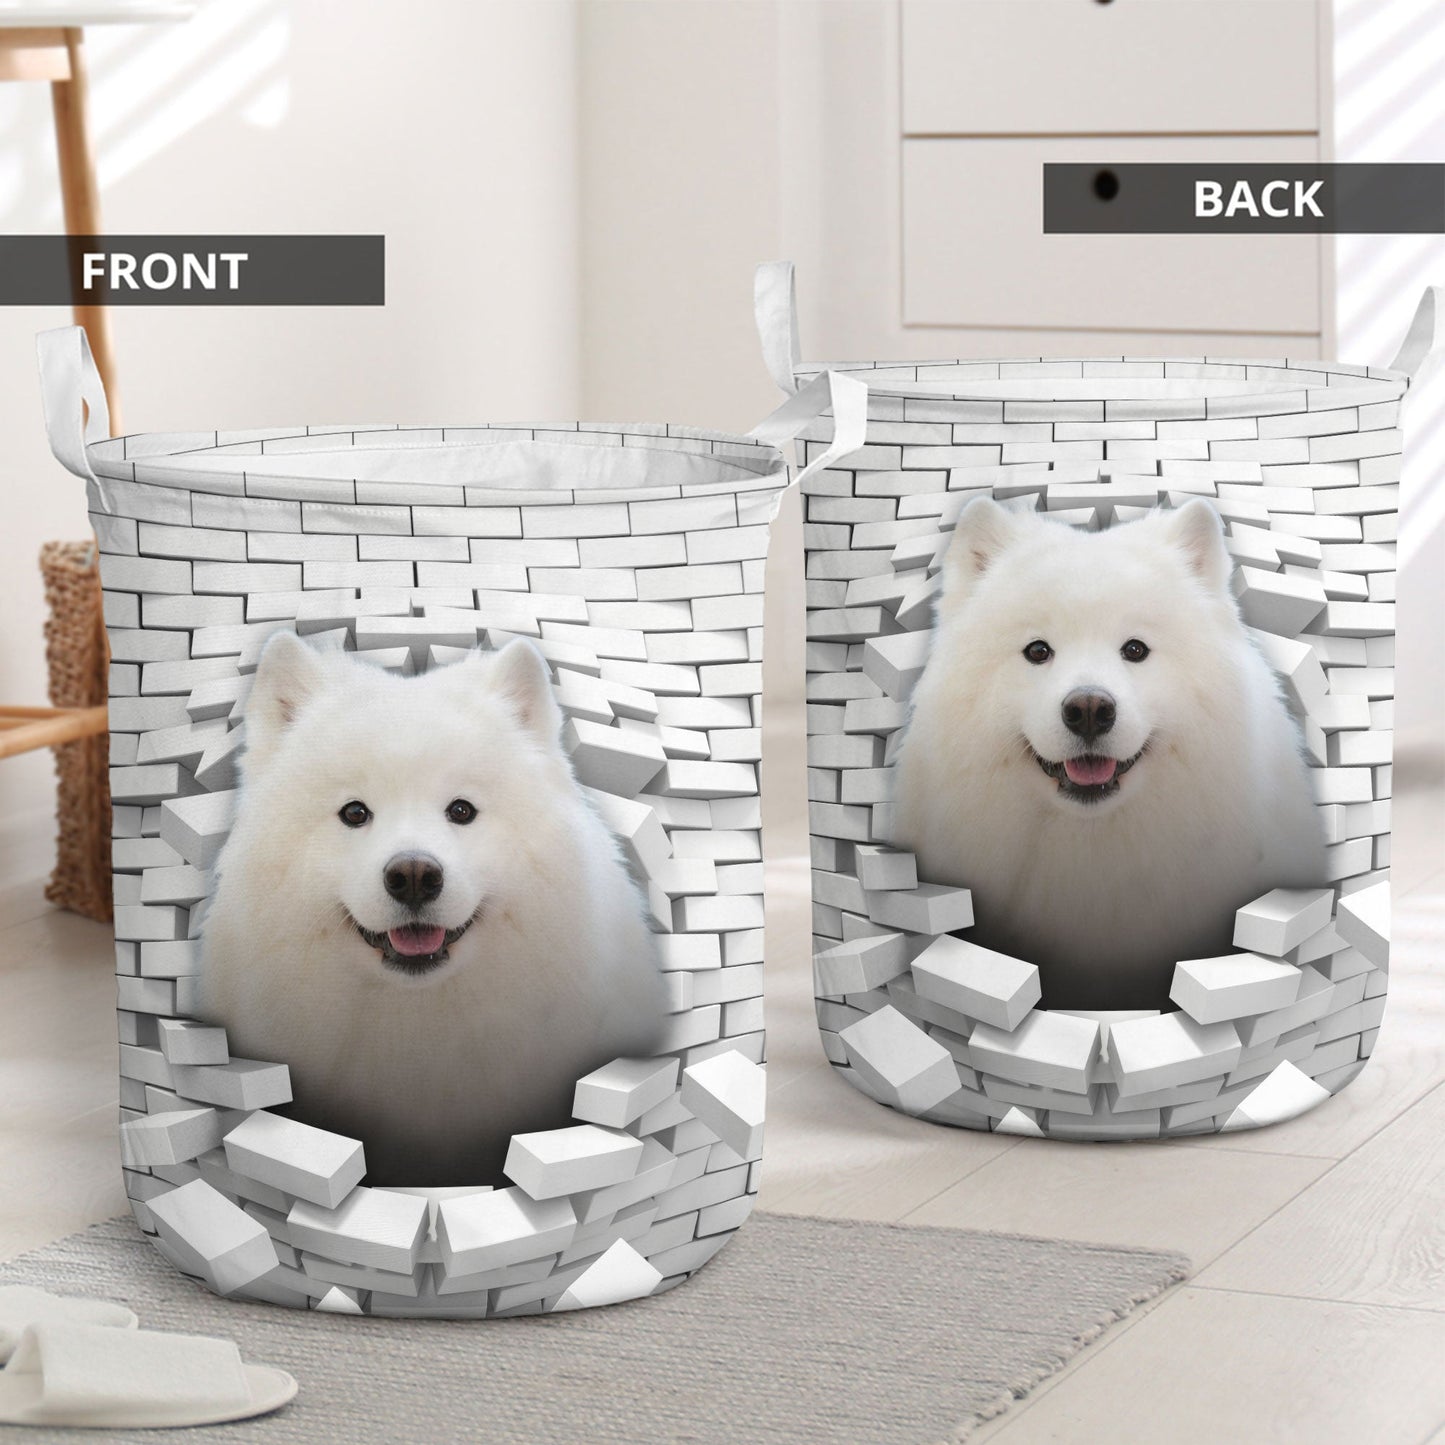 Samoyed - In The Hole Of Wall Pattern Laundry Basket